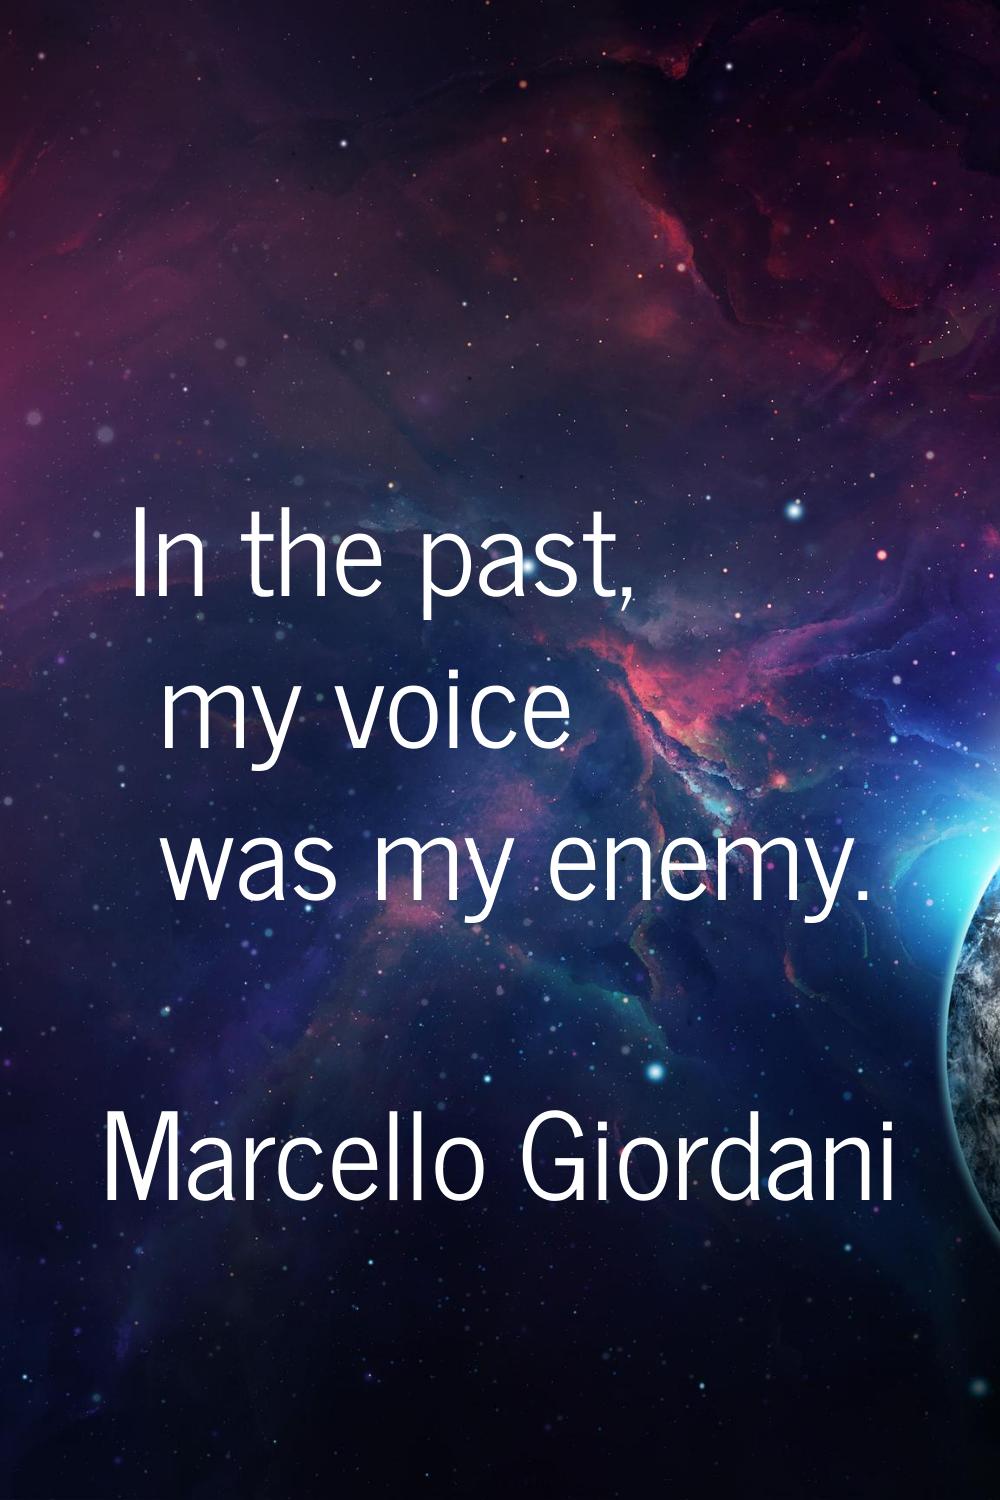 In the past, my voice was my enemy.